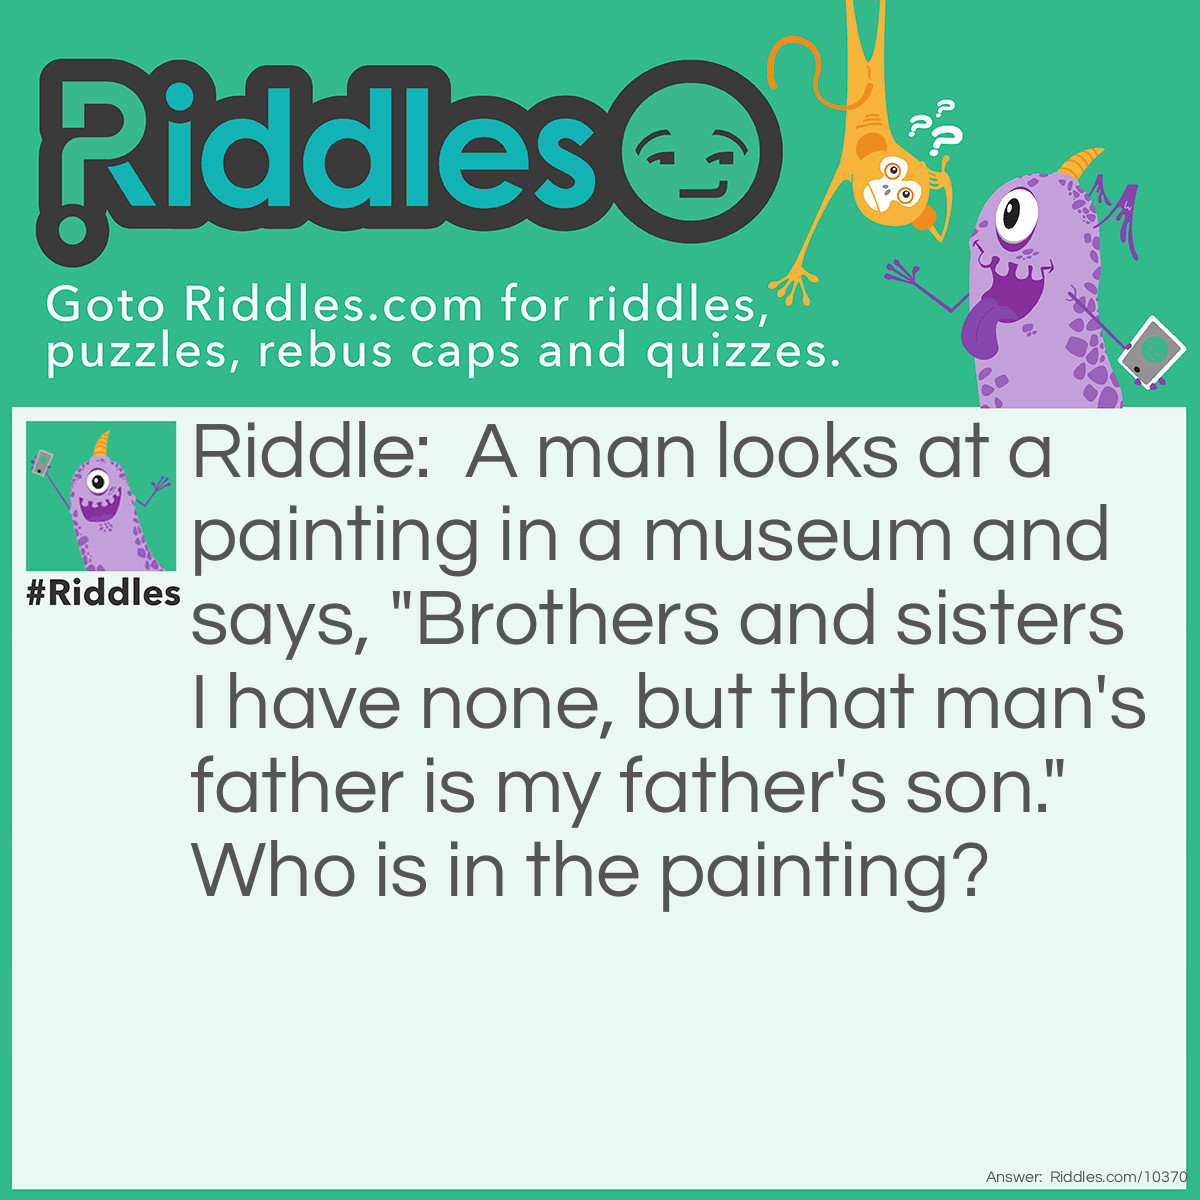 Riddle: A man looks at a painting in a museum and says, "Brothers and sisters I have none, but that man's father is my father's son." Who is in the painting? Answer: The man's son.